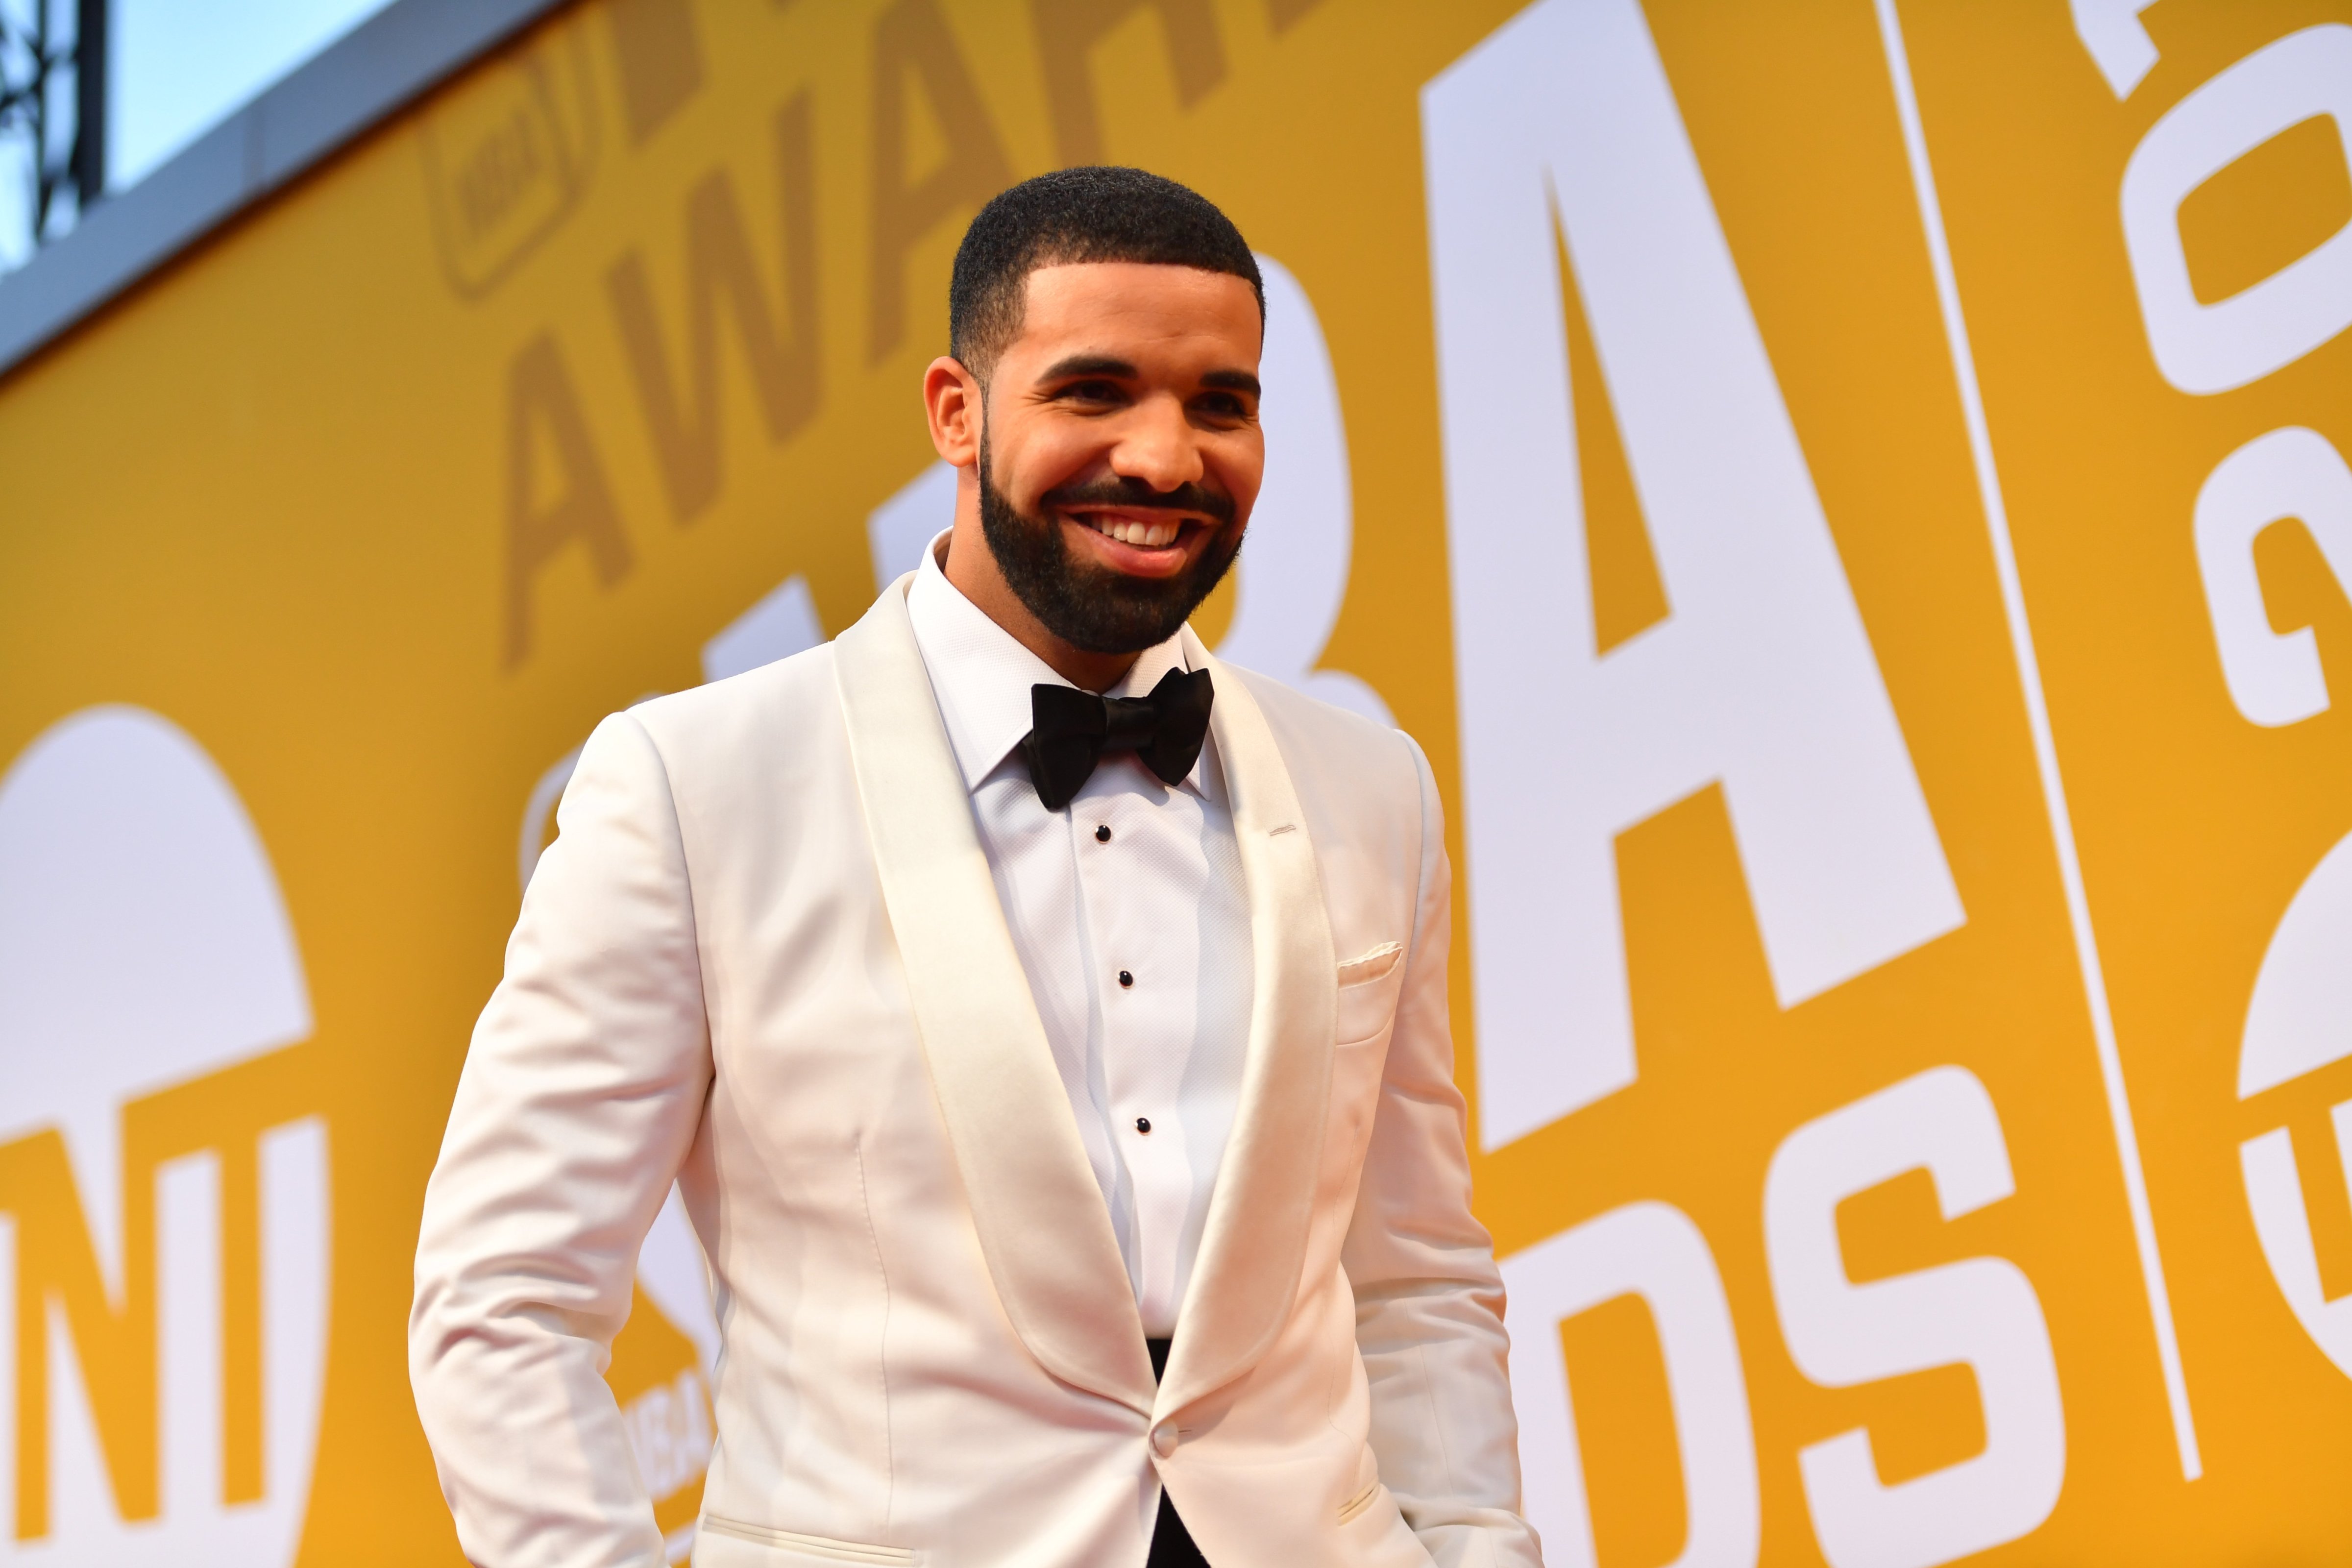 Drake poses on the red carpet during the 2017 NBA Awards Show in New York on June 26, 2017. (Jesse D. Garrabrant—NBAE/Getty Images)